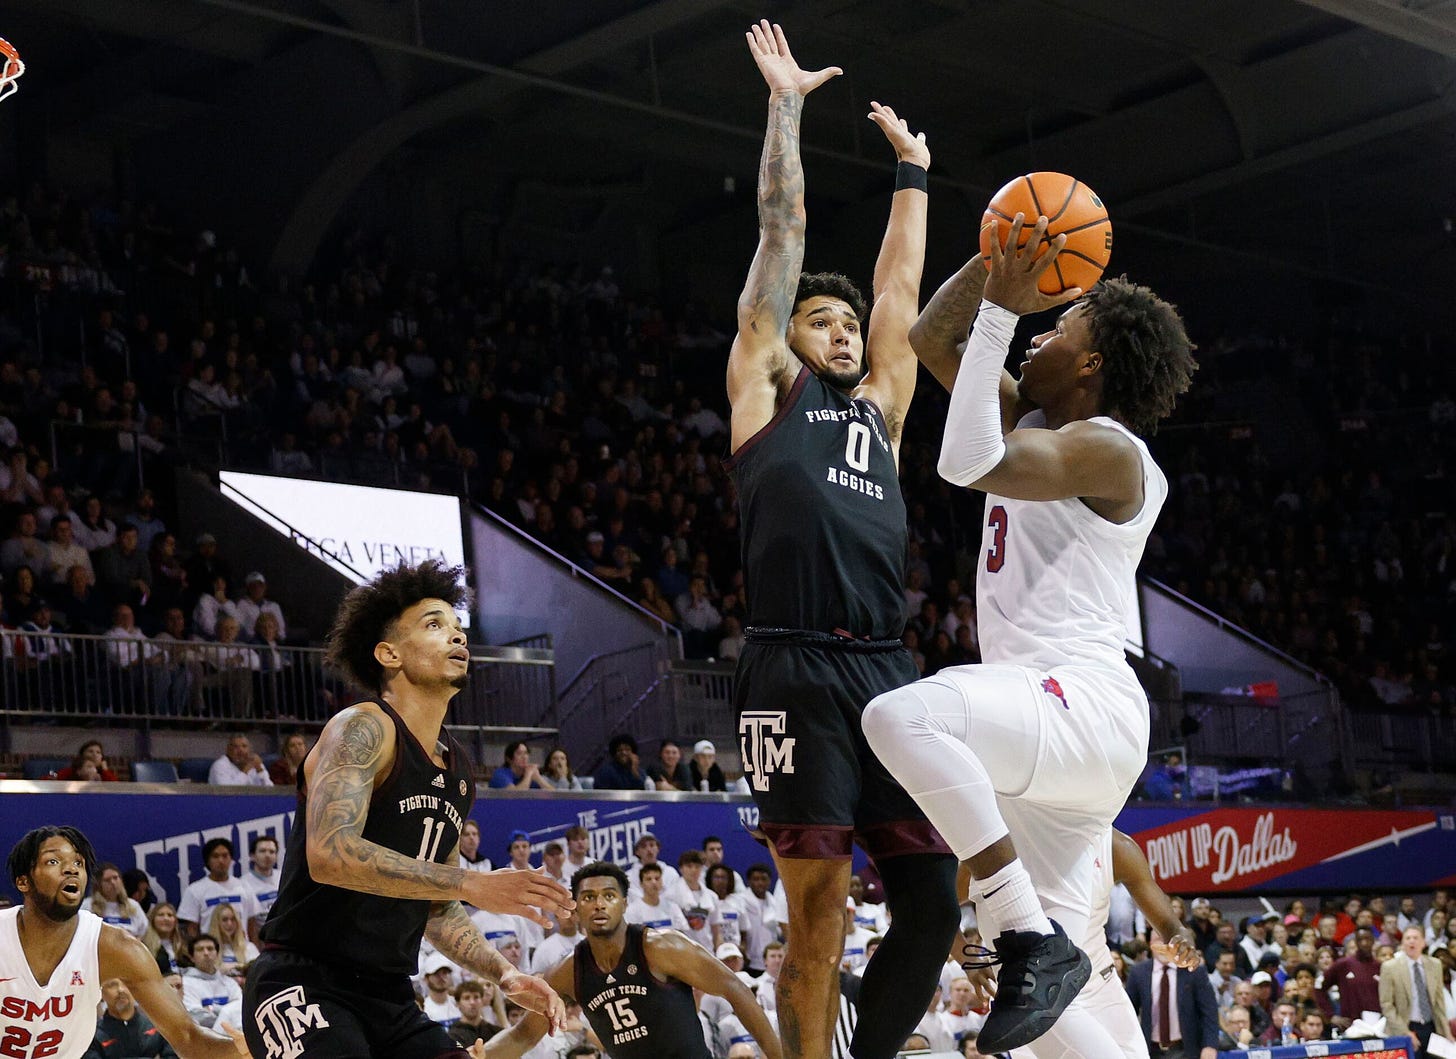 Photos: No. 13 Texas A&M comes out on top in 'tough-nosed' showdown with SMU